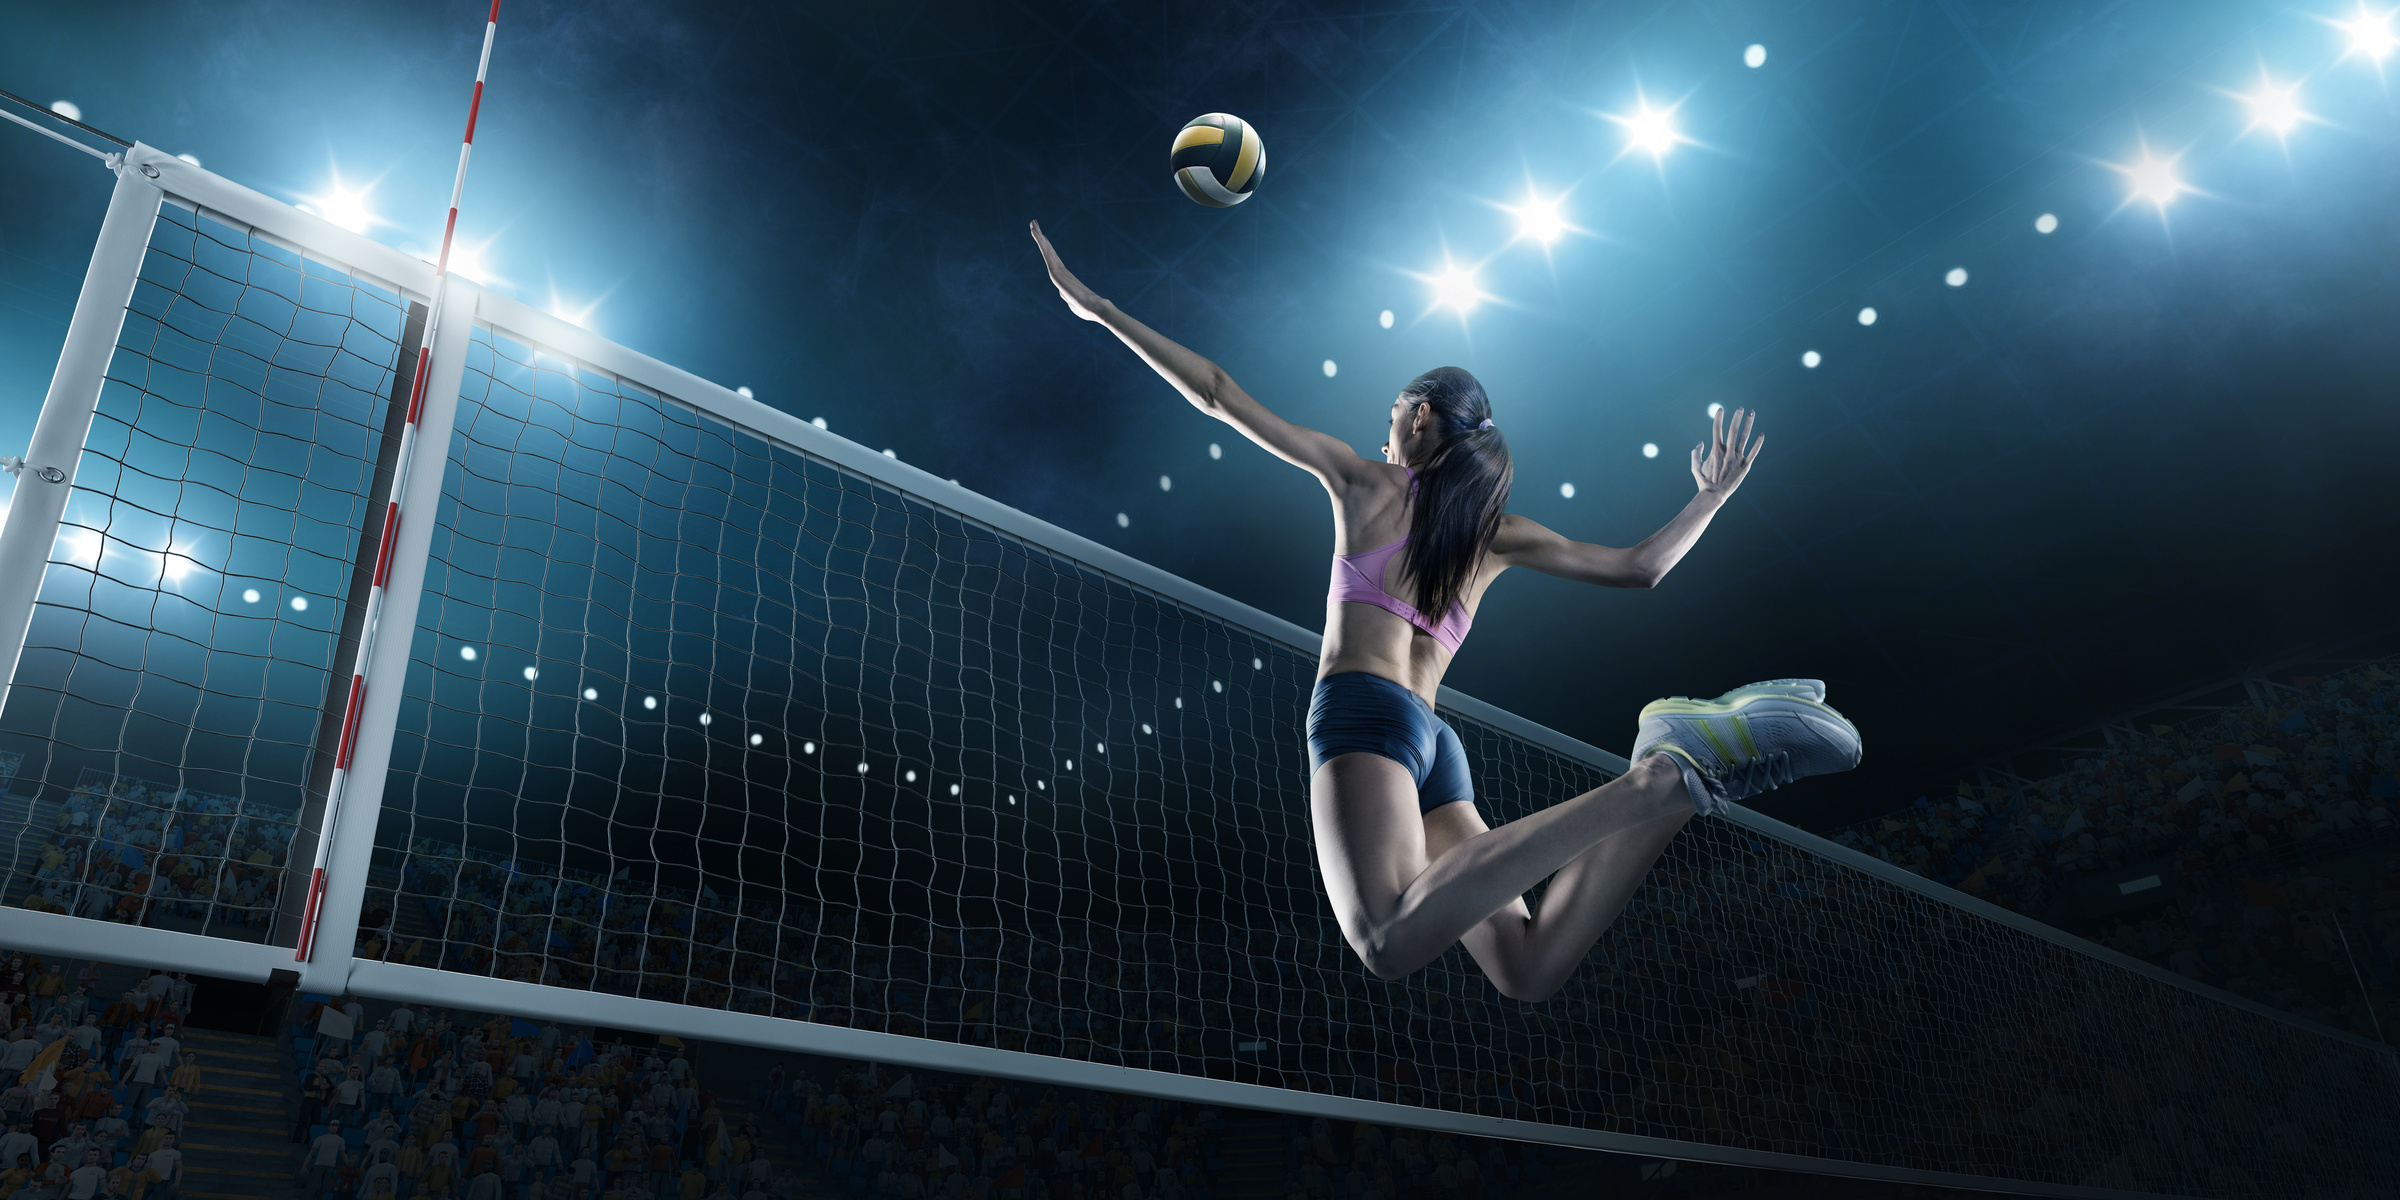 Volleyball: Female player in action